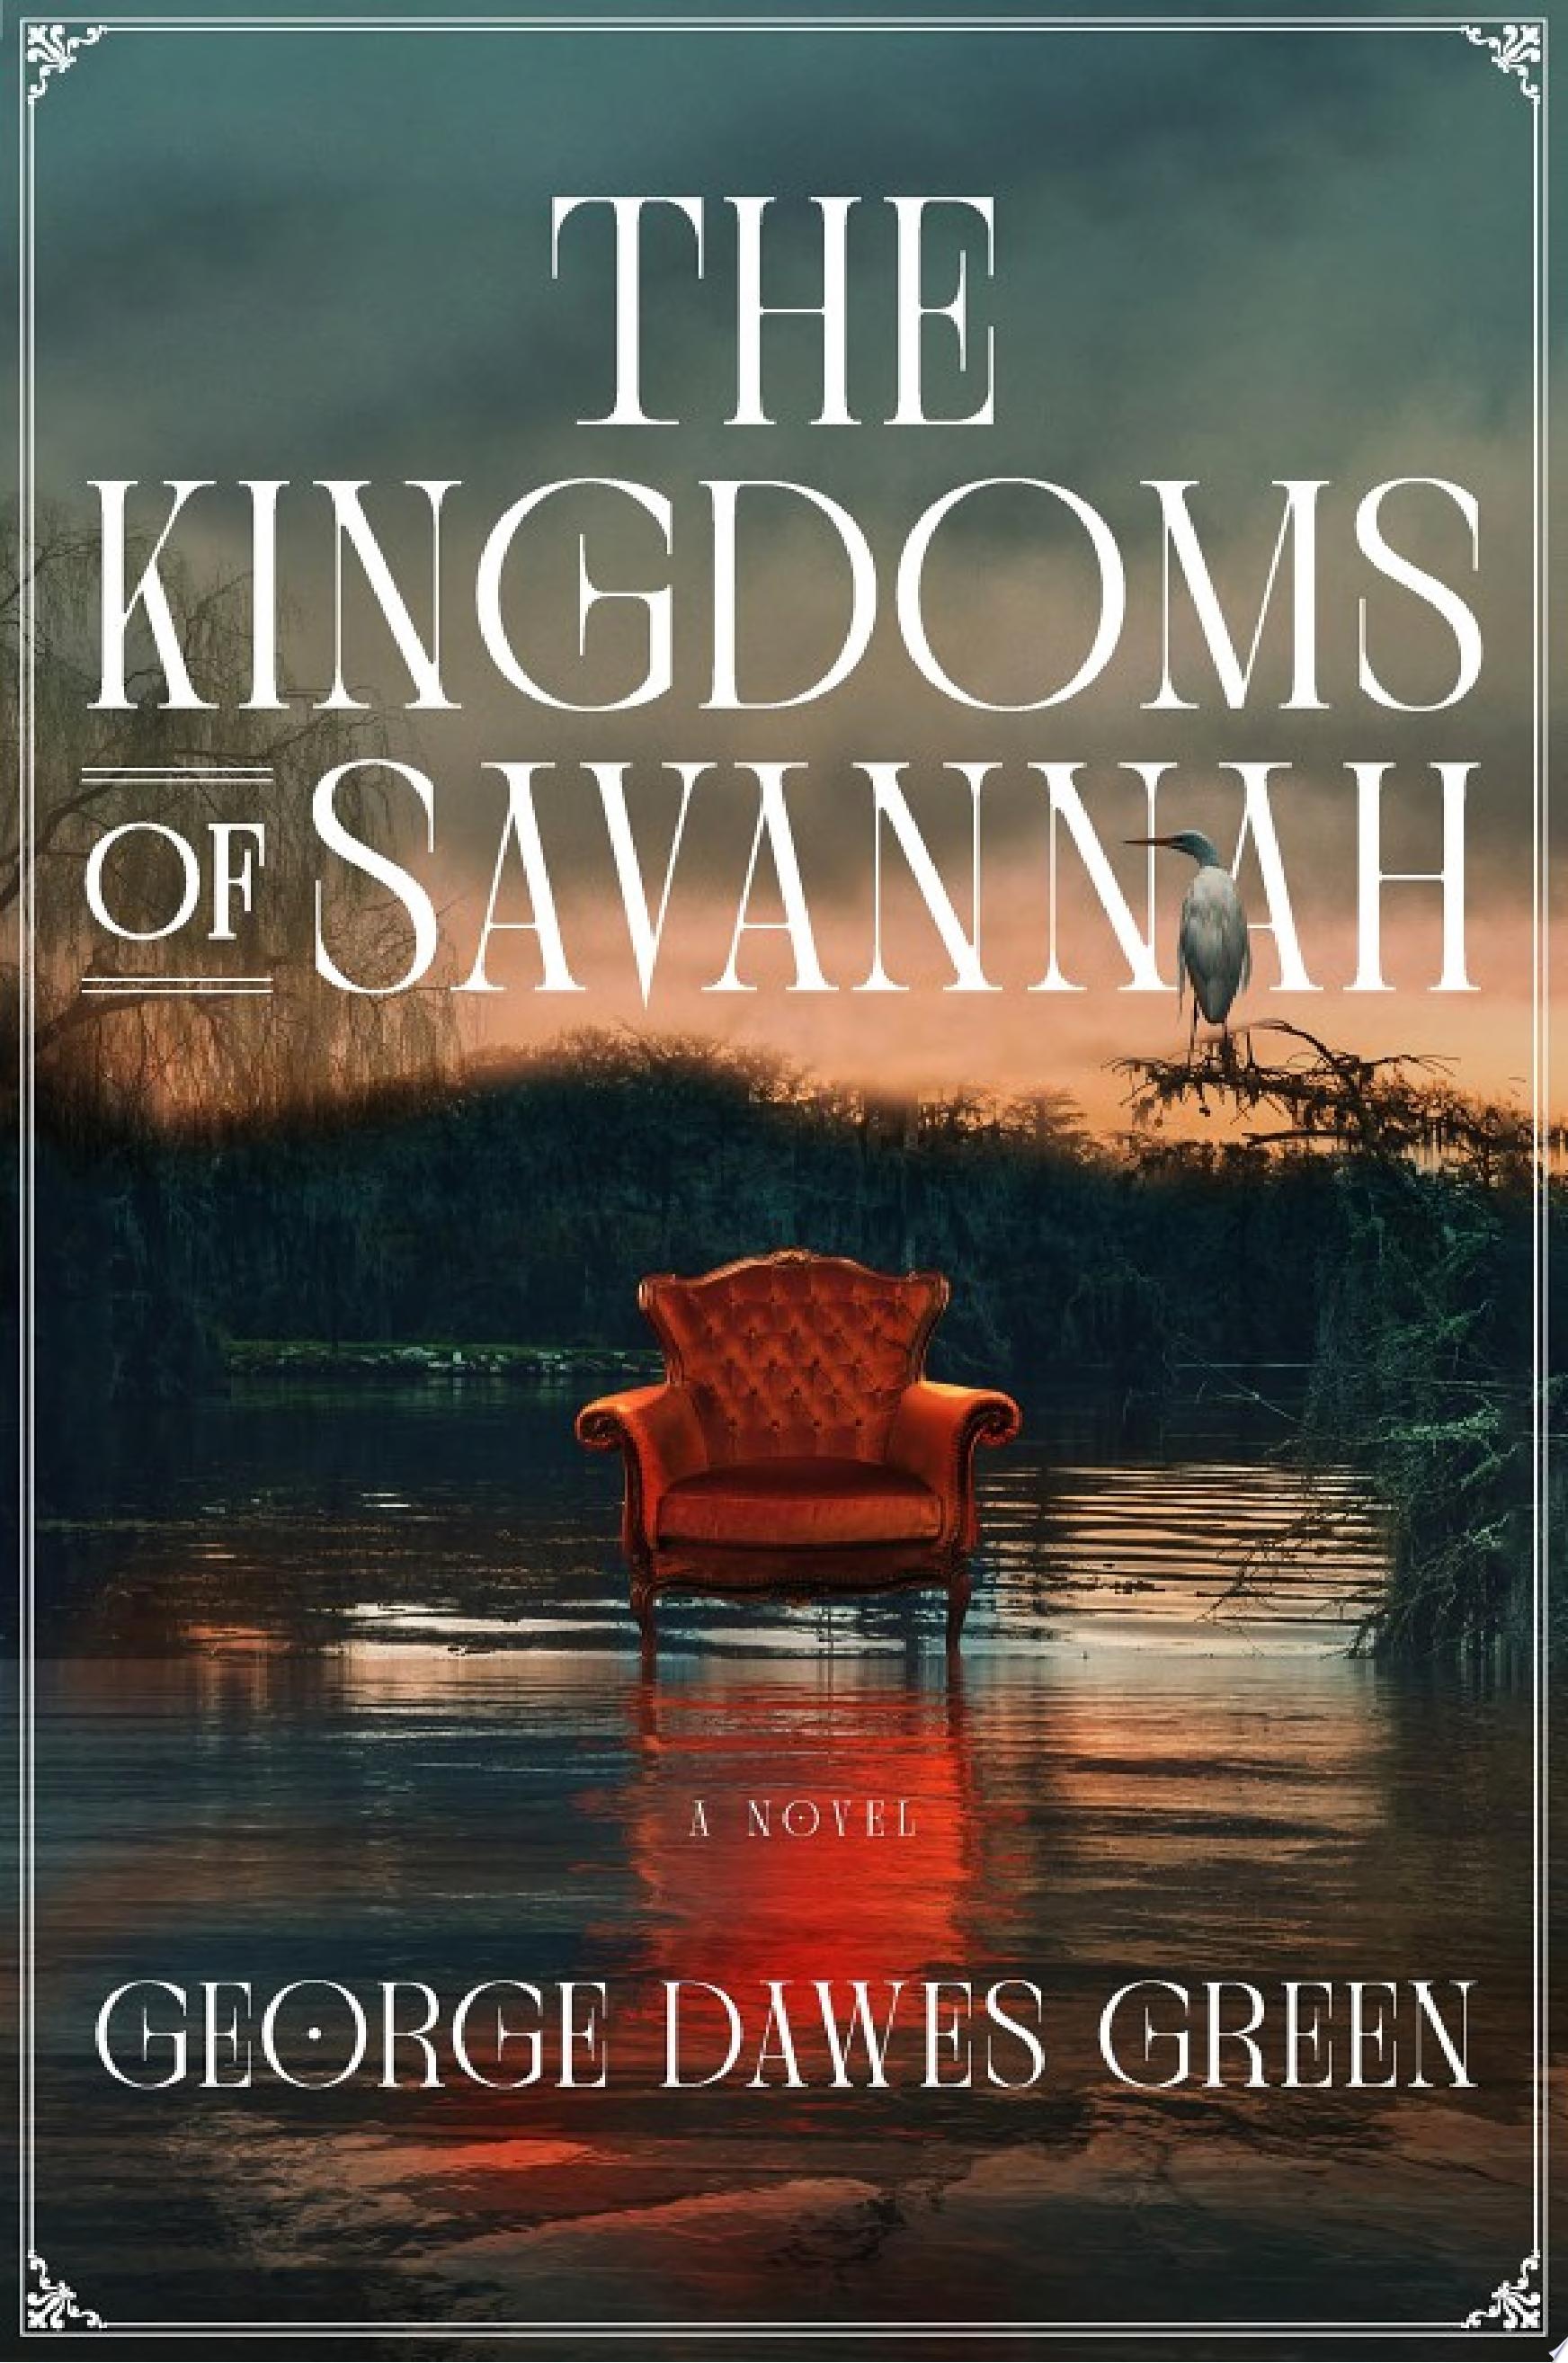 Image for "The Kingdoms of Savannah"